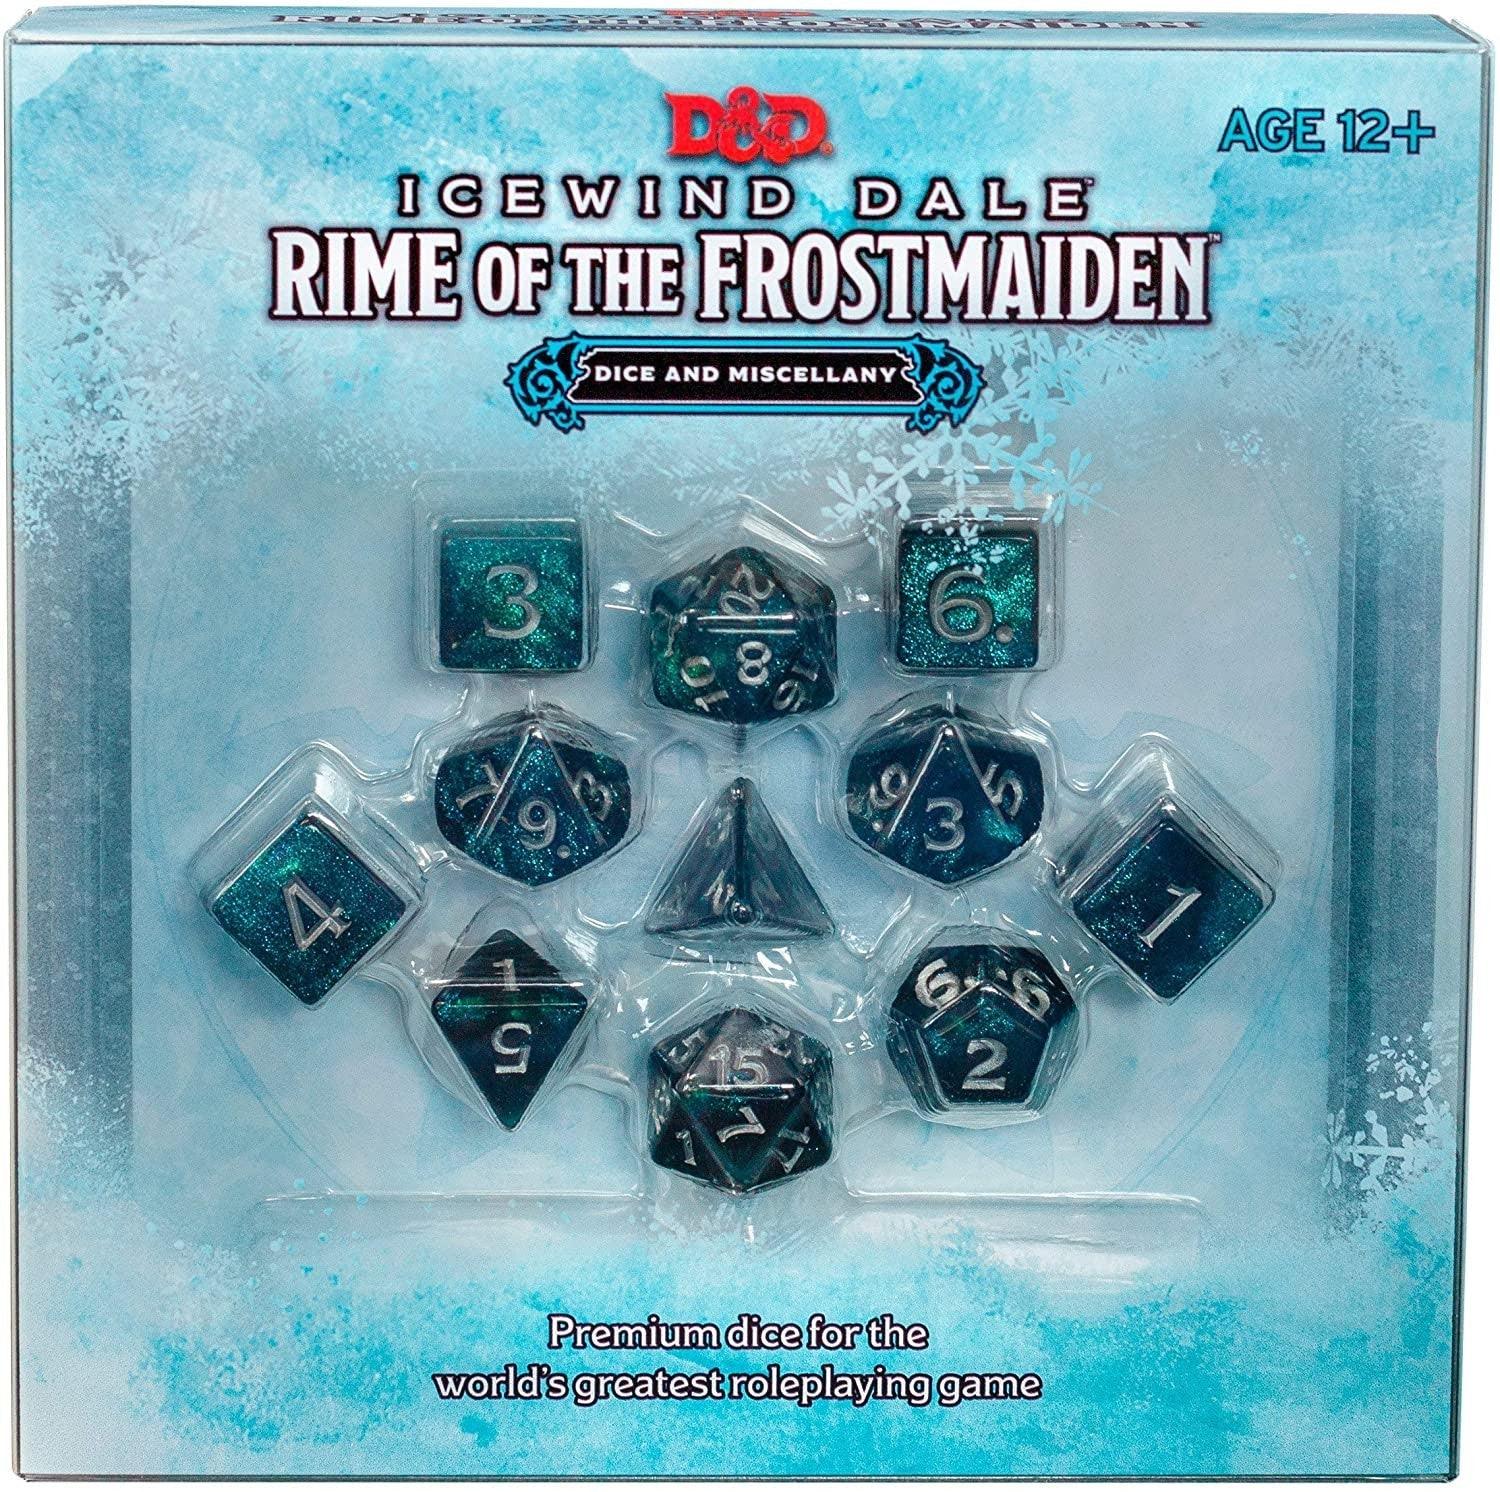 VR-87543 D&D Dungeons & Dragons Icewind Dale Rime of the Frostmaiden Dice and Misecellany - Wizards of the Coast - Titan Pop Culture